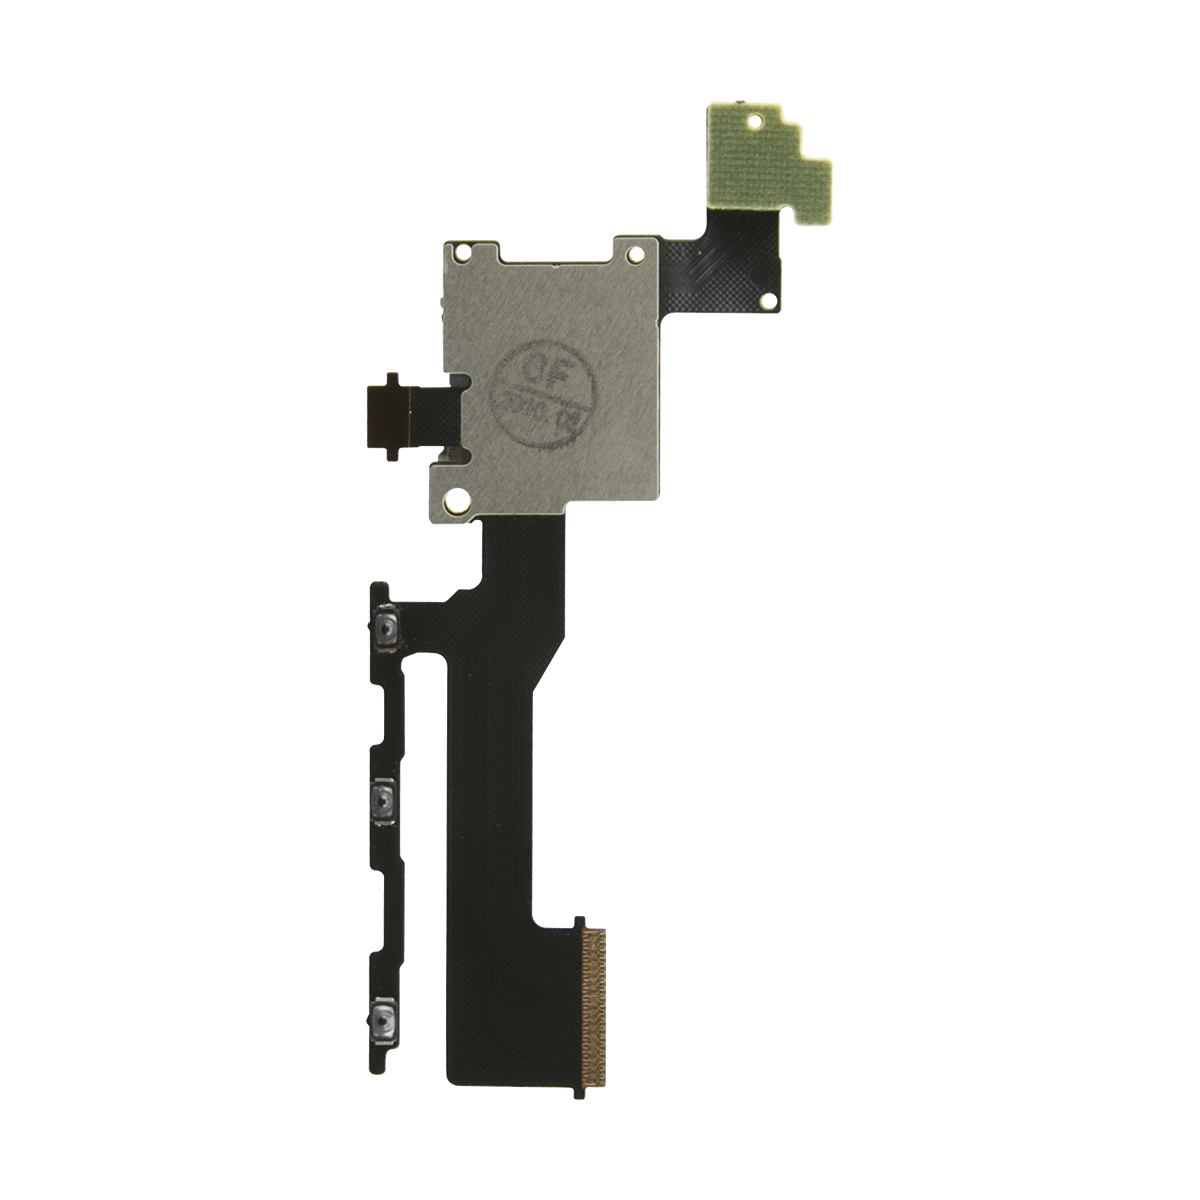 HTC One M9 Power & Volume Buttons Flex Cable with microSD Card Slot